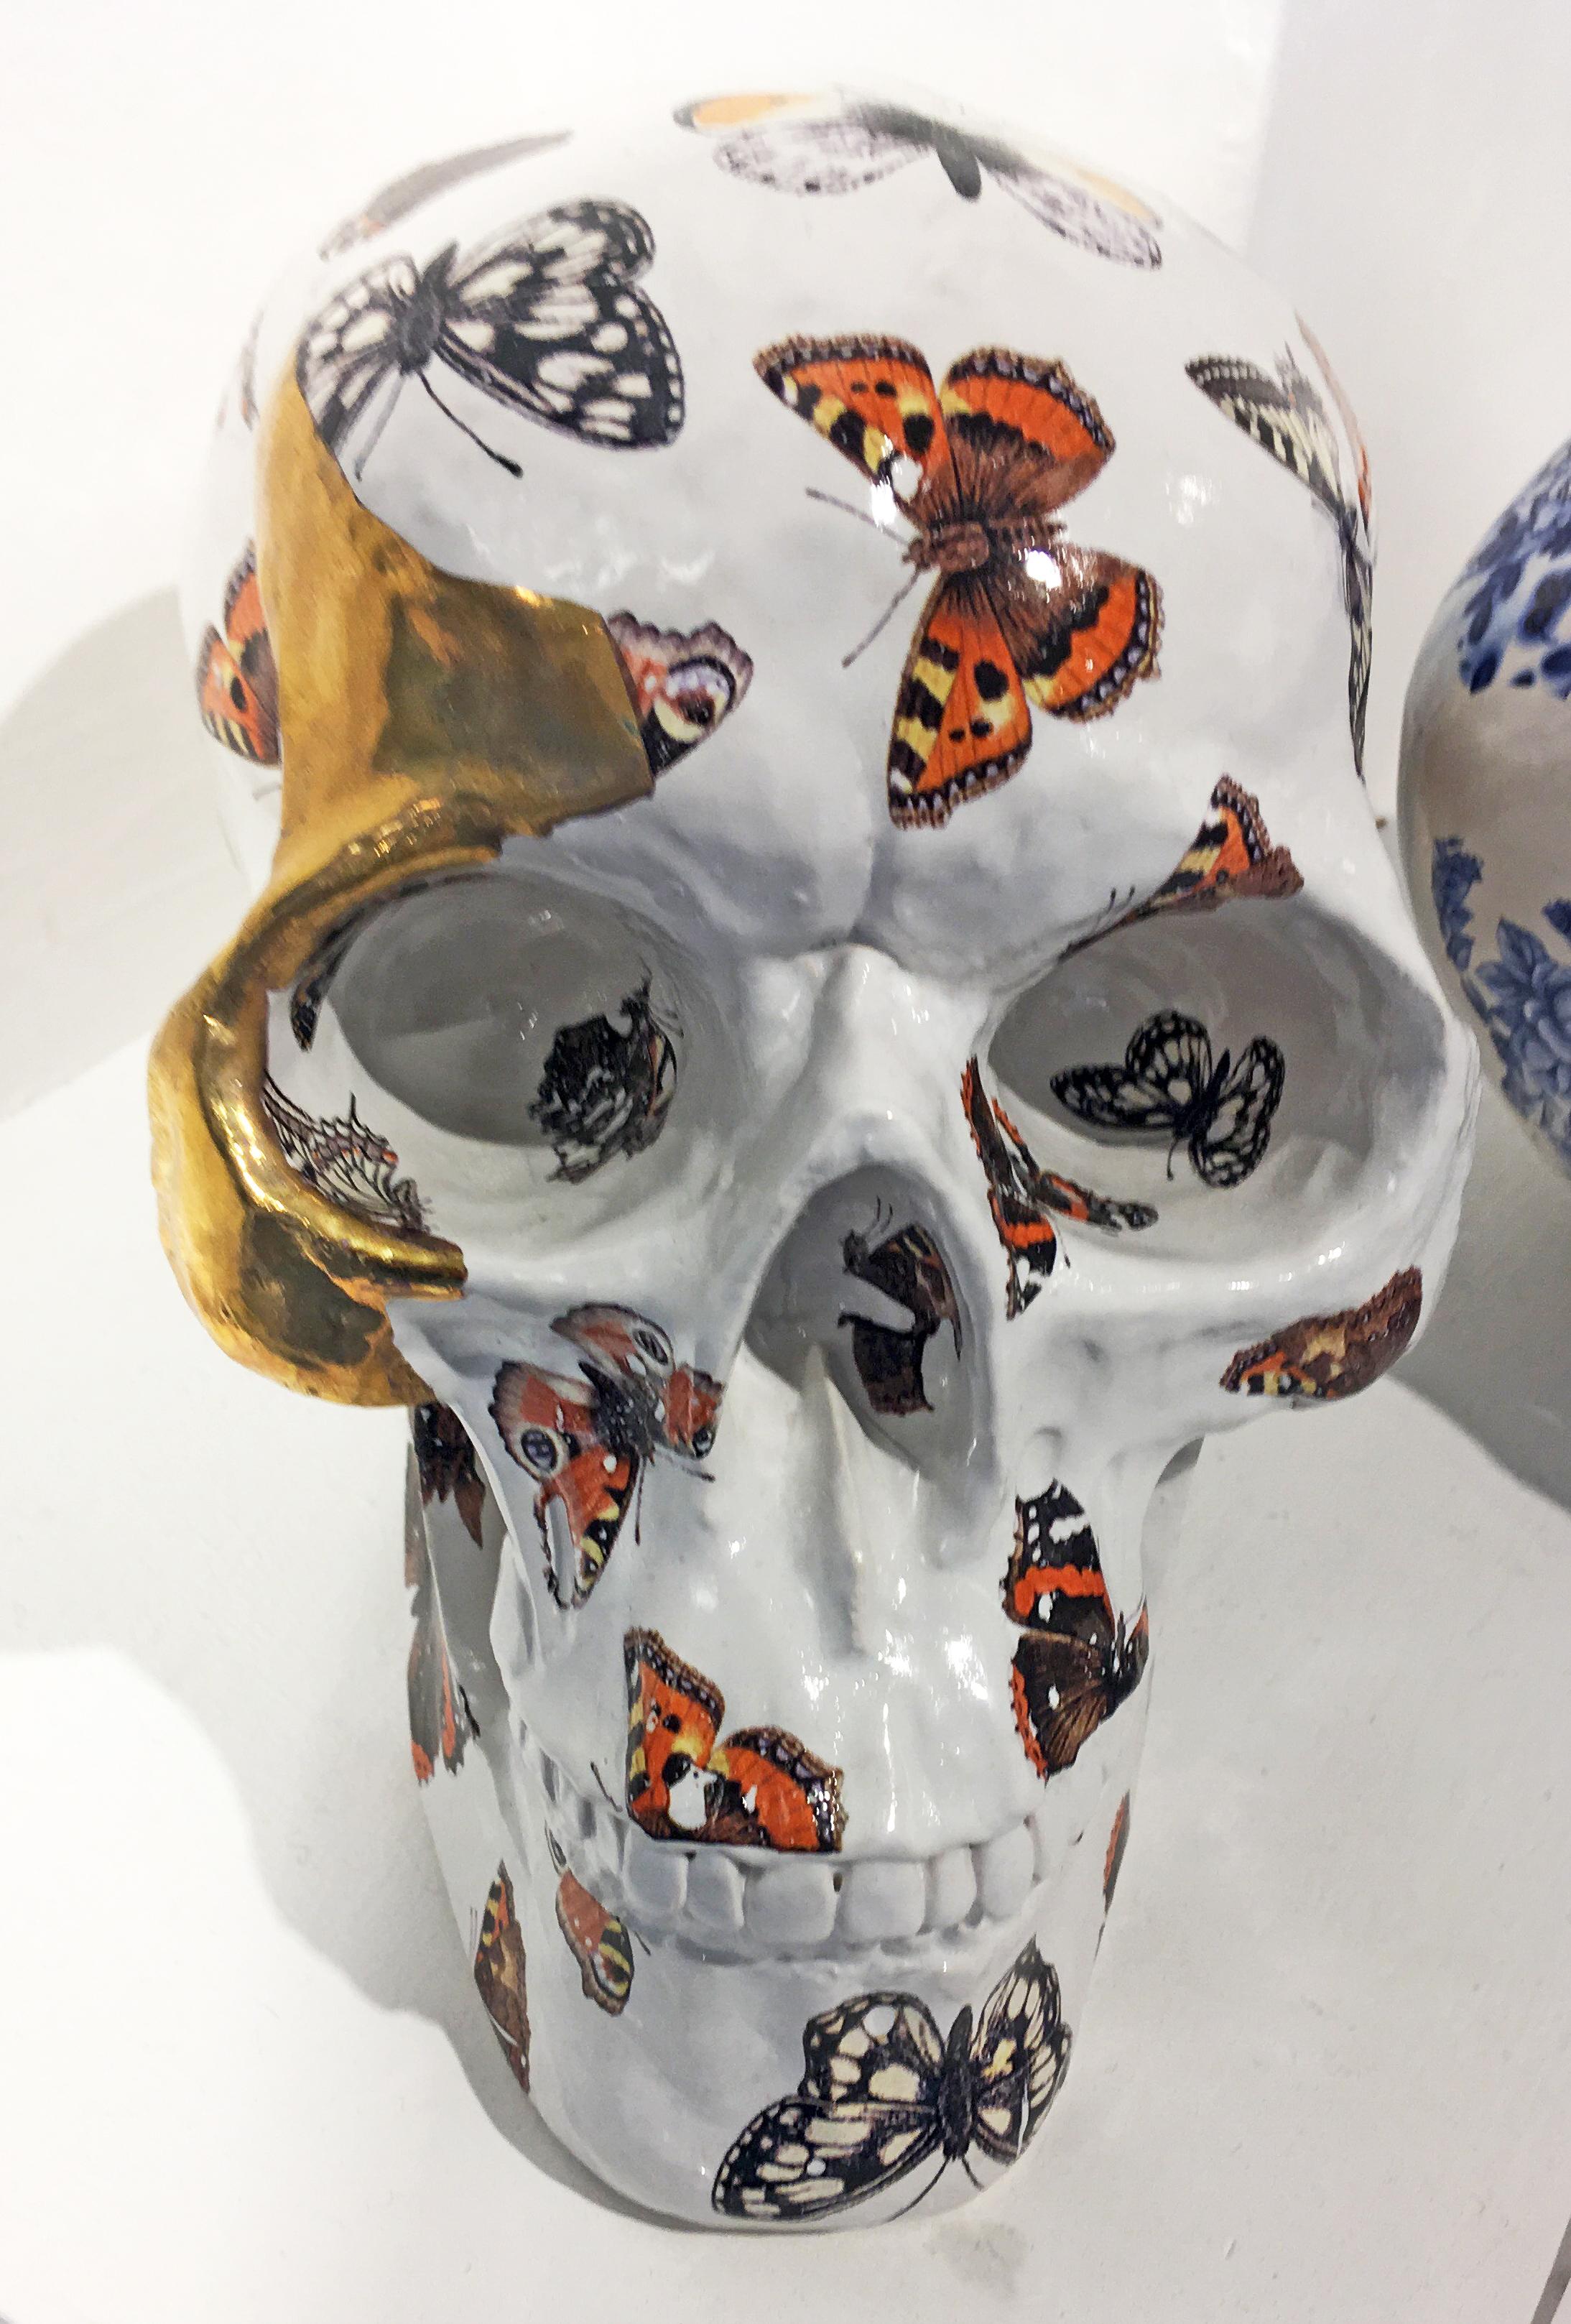 Butterfly Skull II - Contemporary Sculpture by Pierre Williams